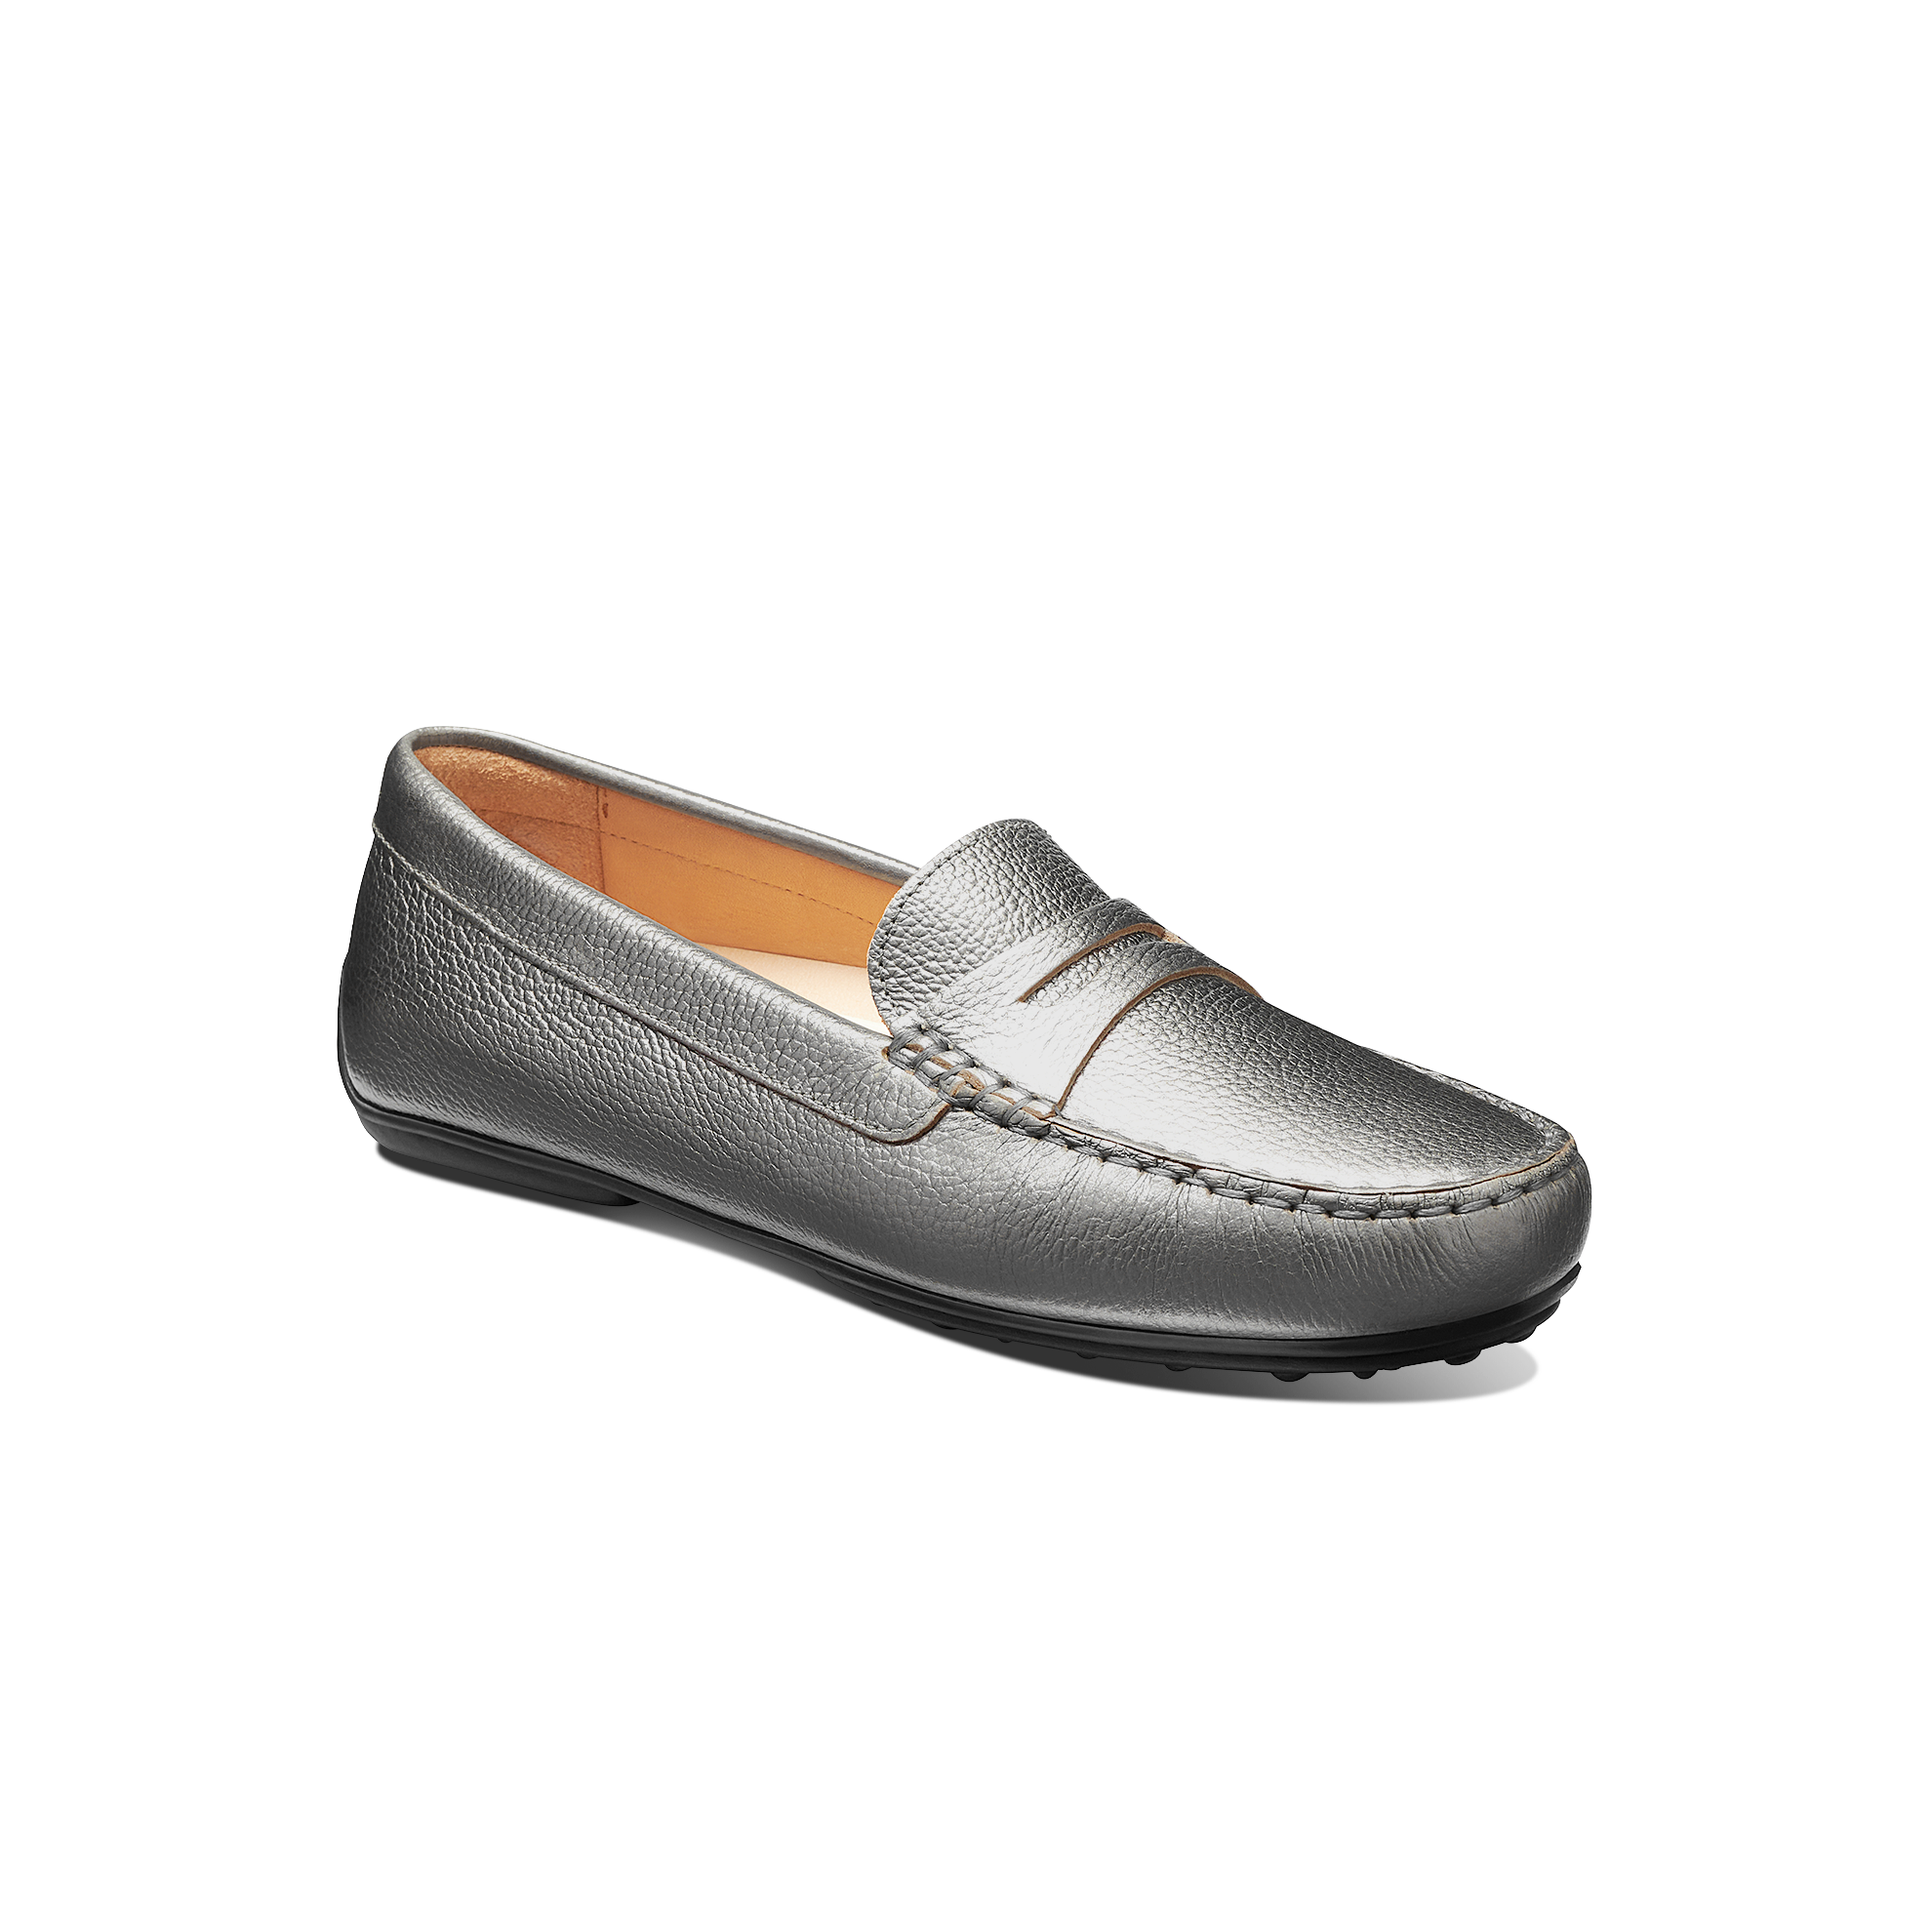 Louis Vuitton Mens Loafers & Slip-Ons, Black, 7.5 (Stock Confirmation Required)